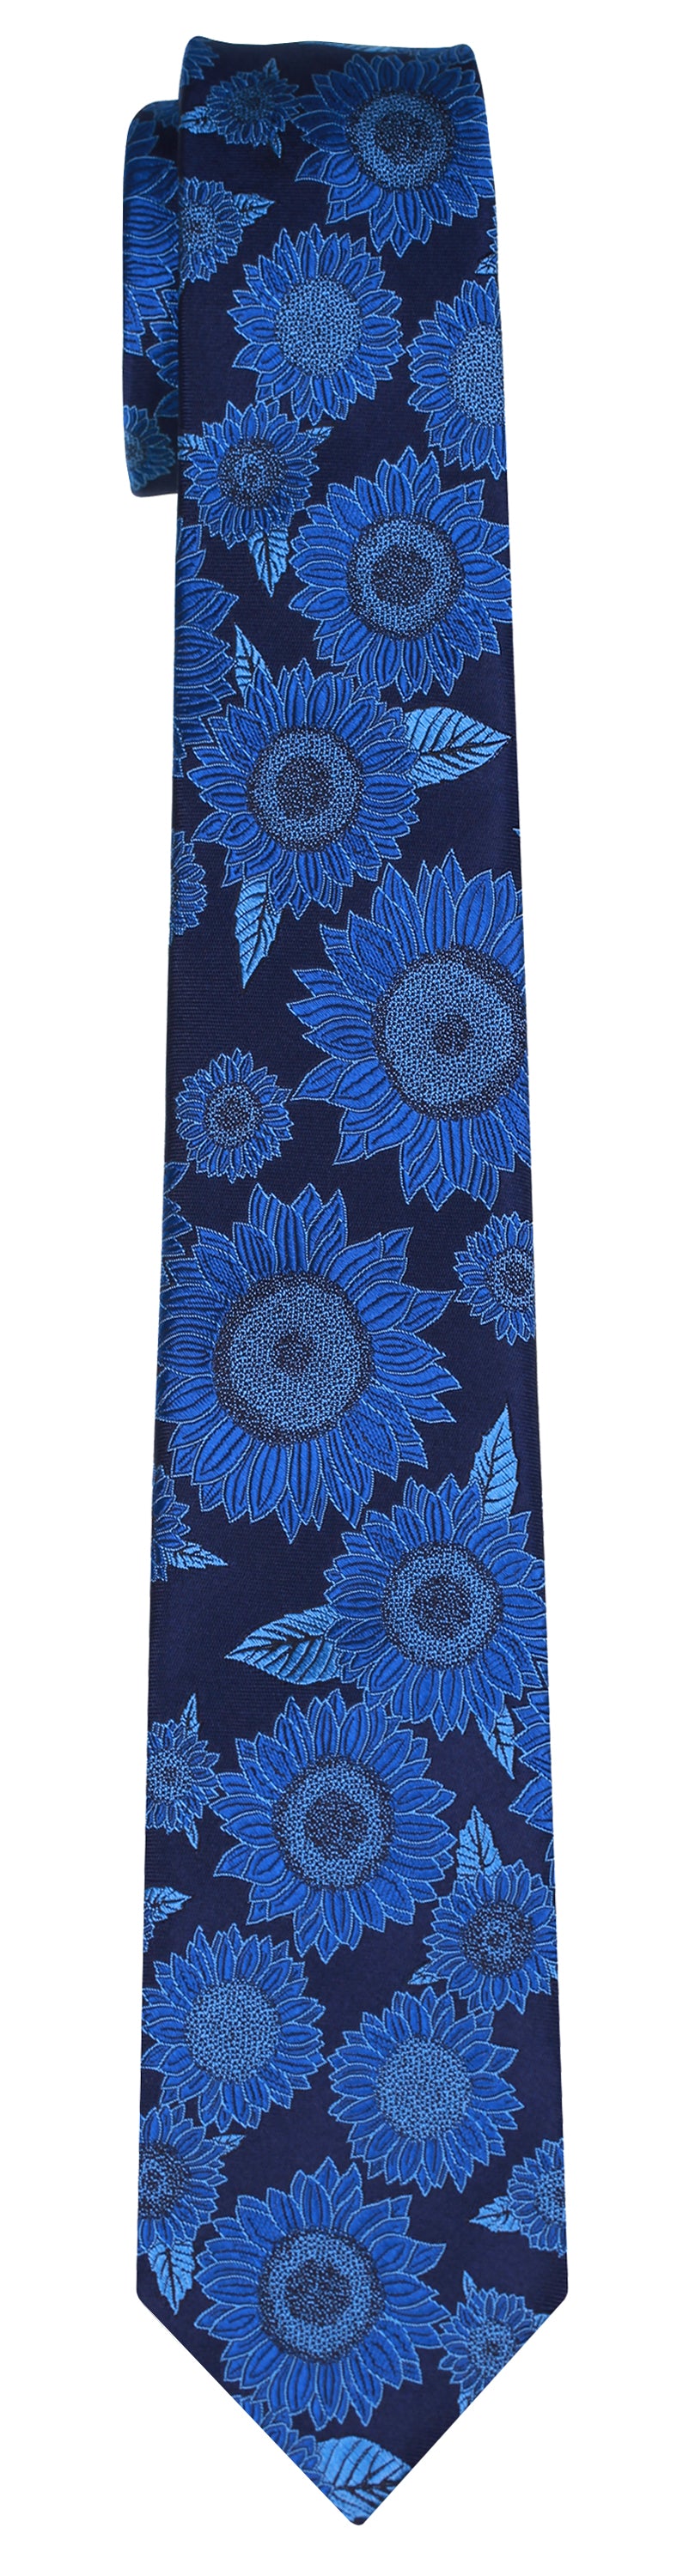 Mimi Fong Sunflower Tie in Pacific